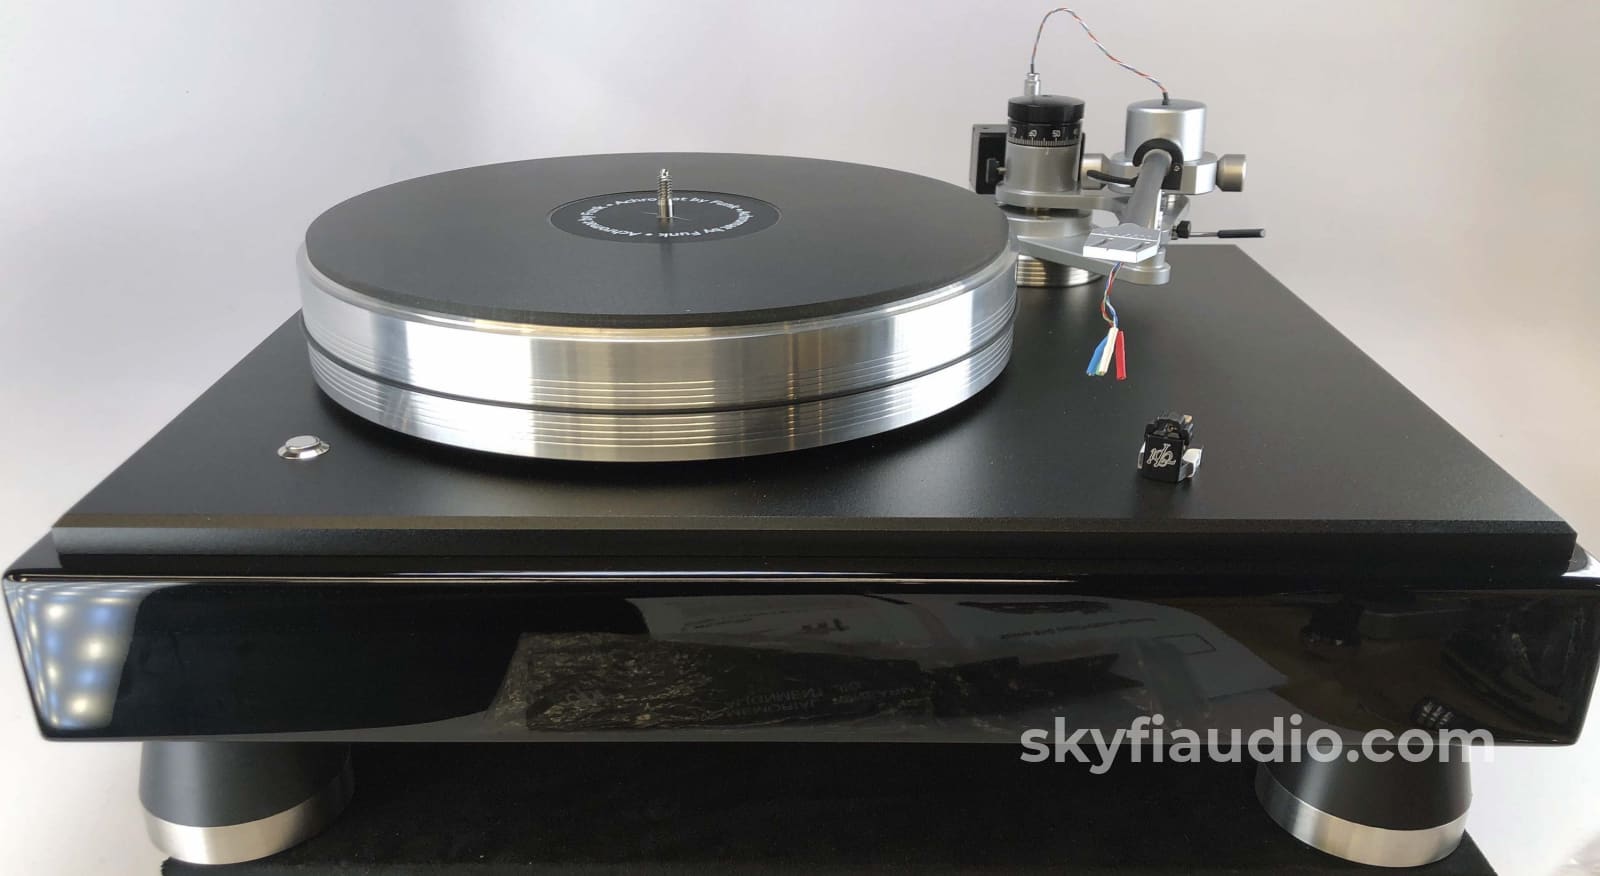 Vpi Classic 3 Turntable - With Jwm Memorial Arm And New Vpi/Grado Gold Cartridge